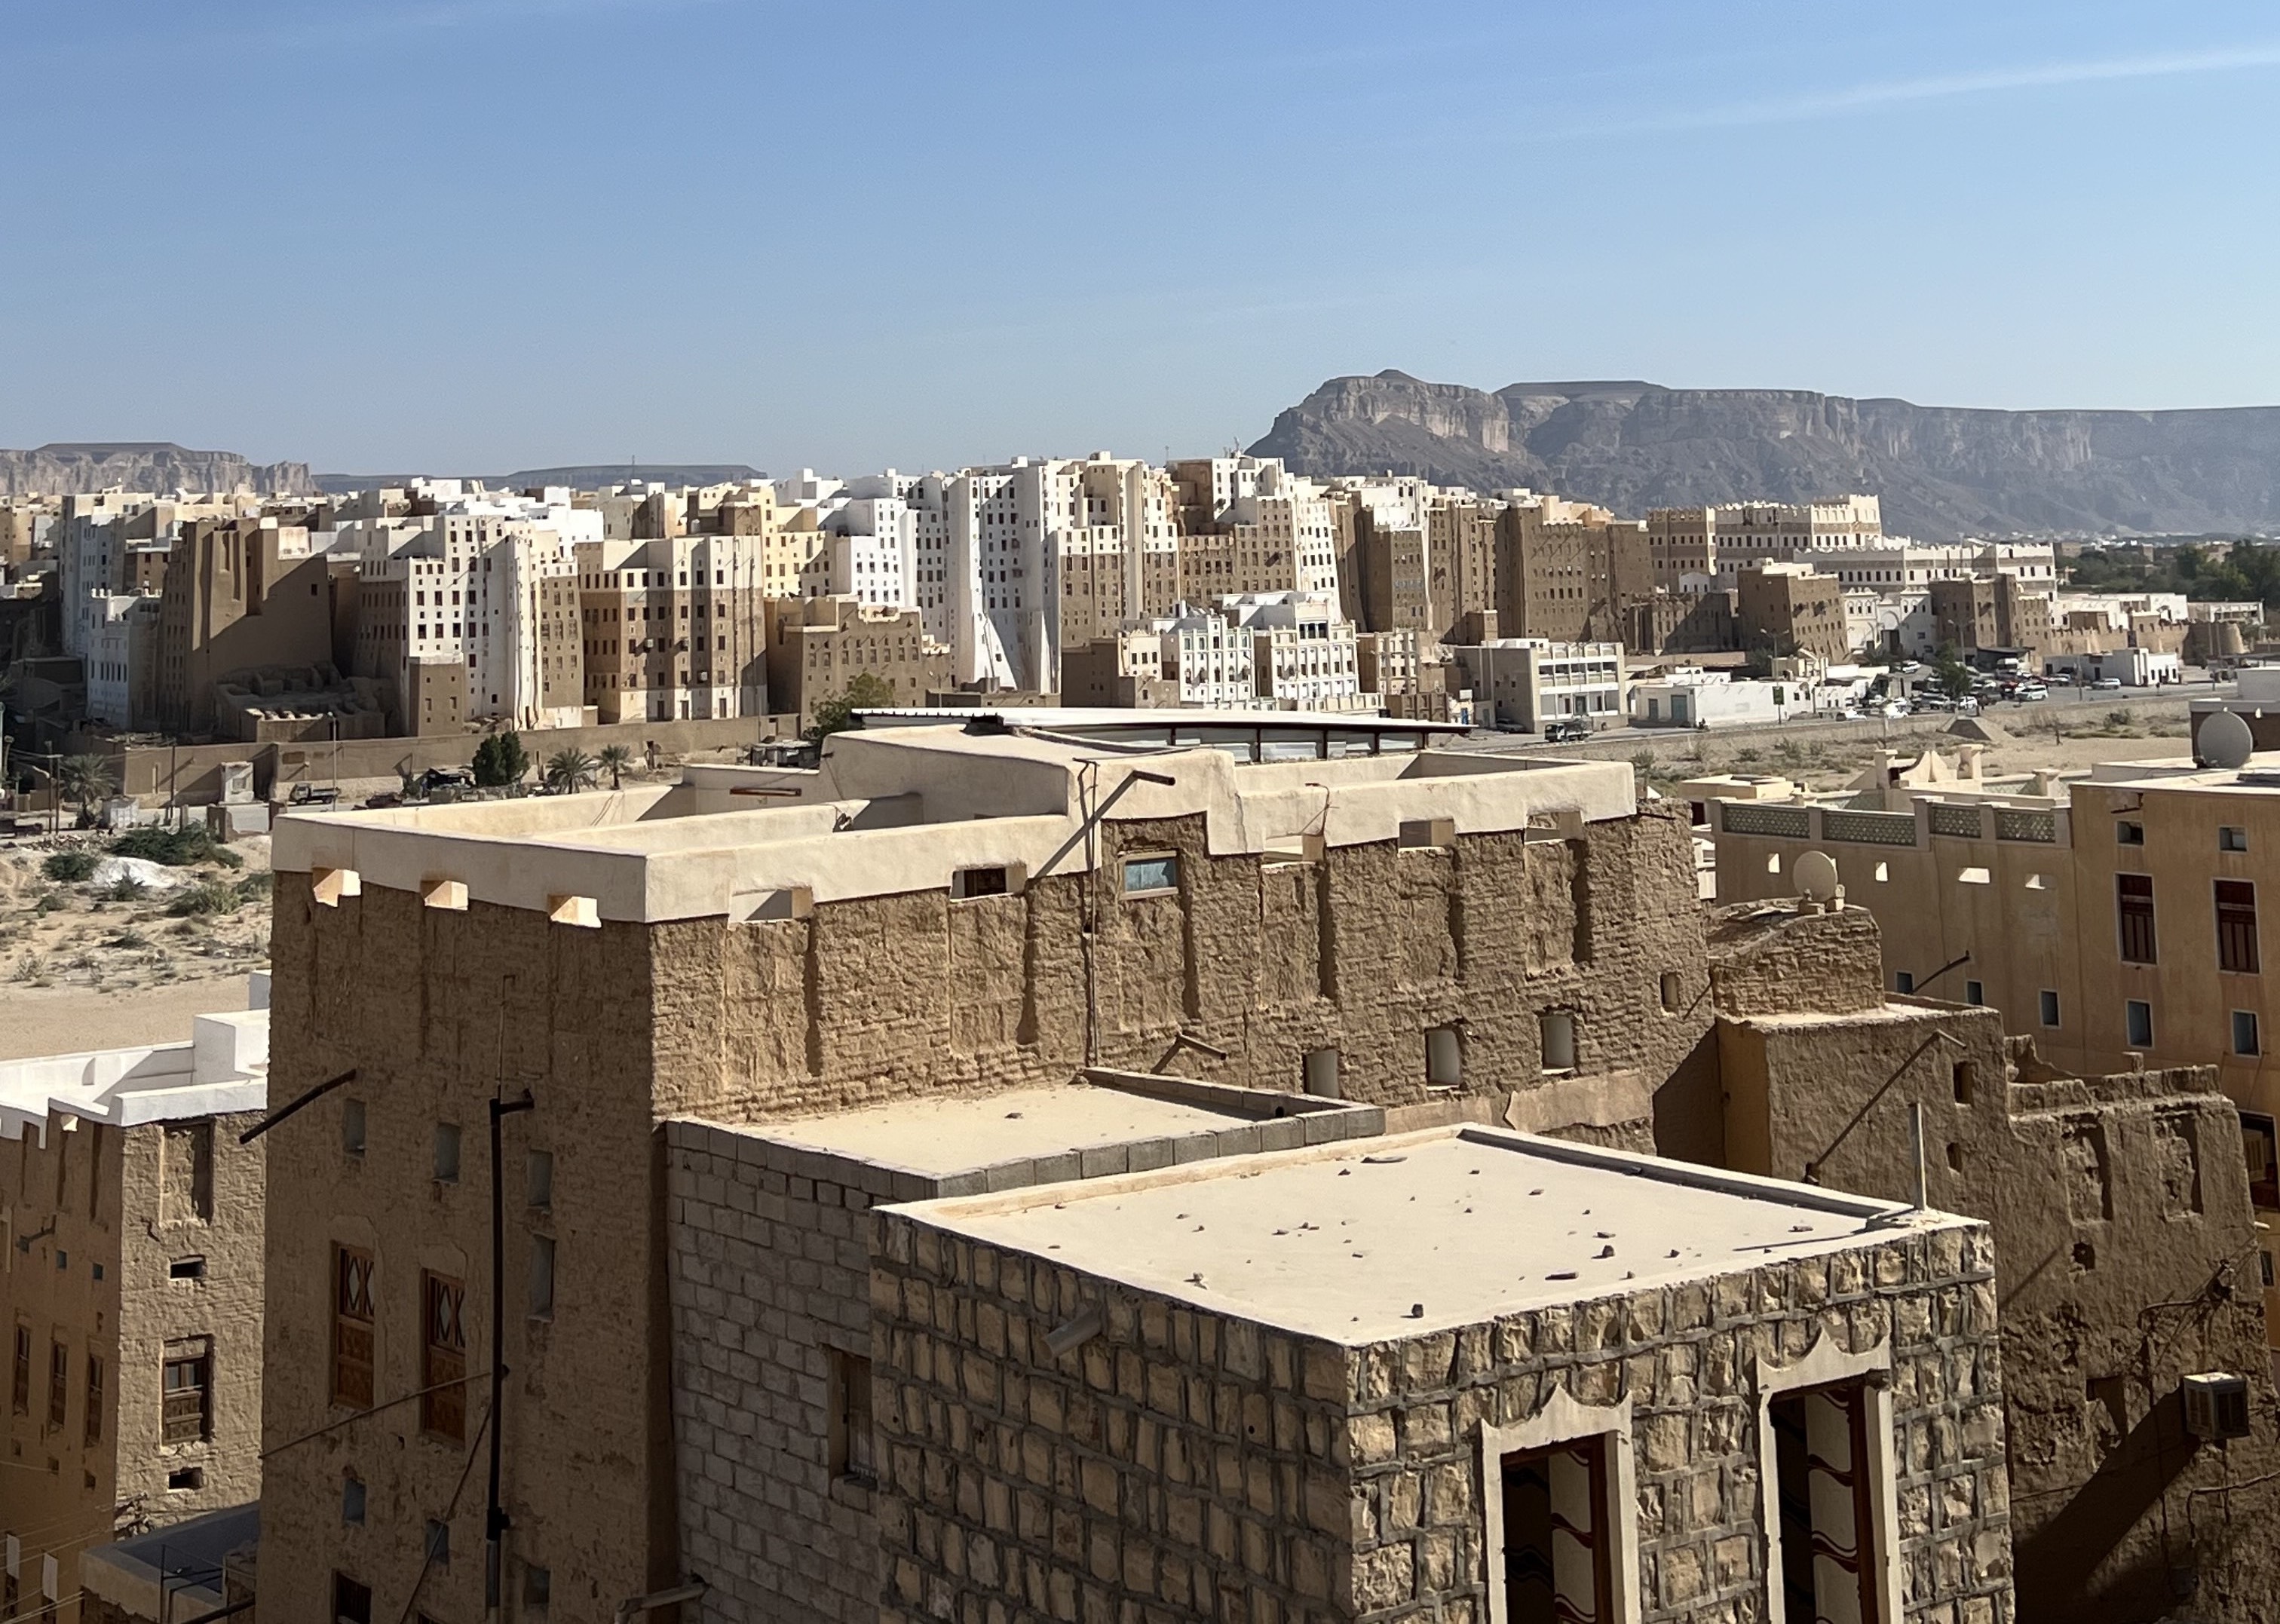 The old walled city of Shibam. Photo courtesy of the author.